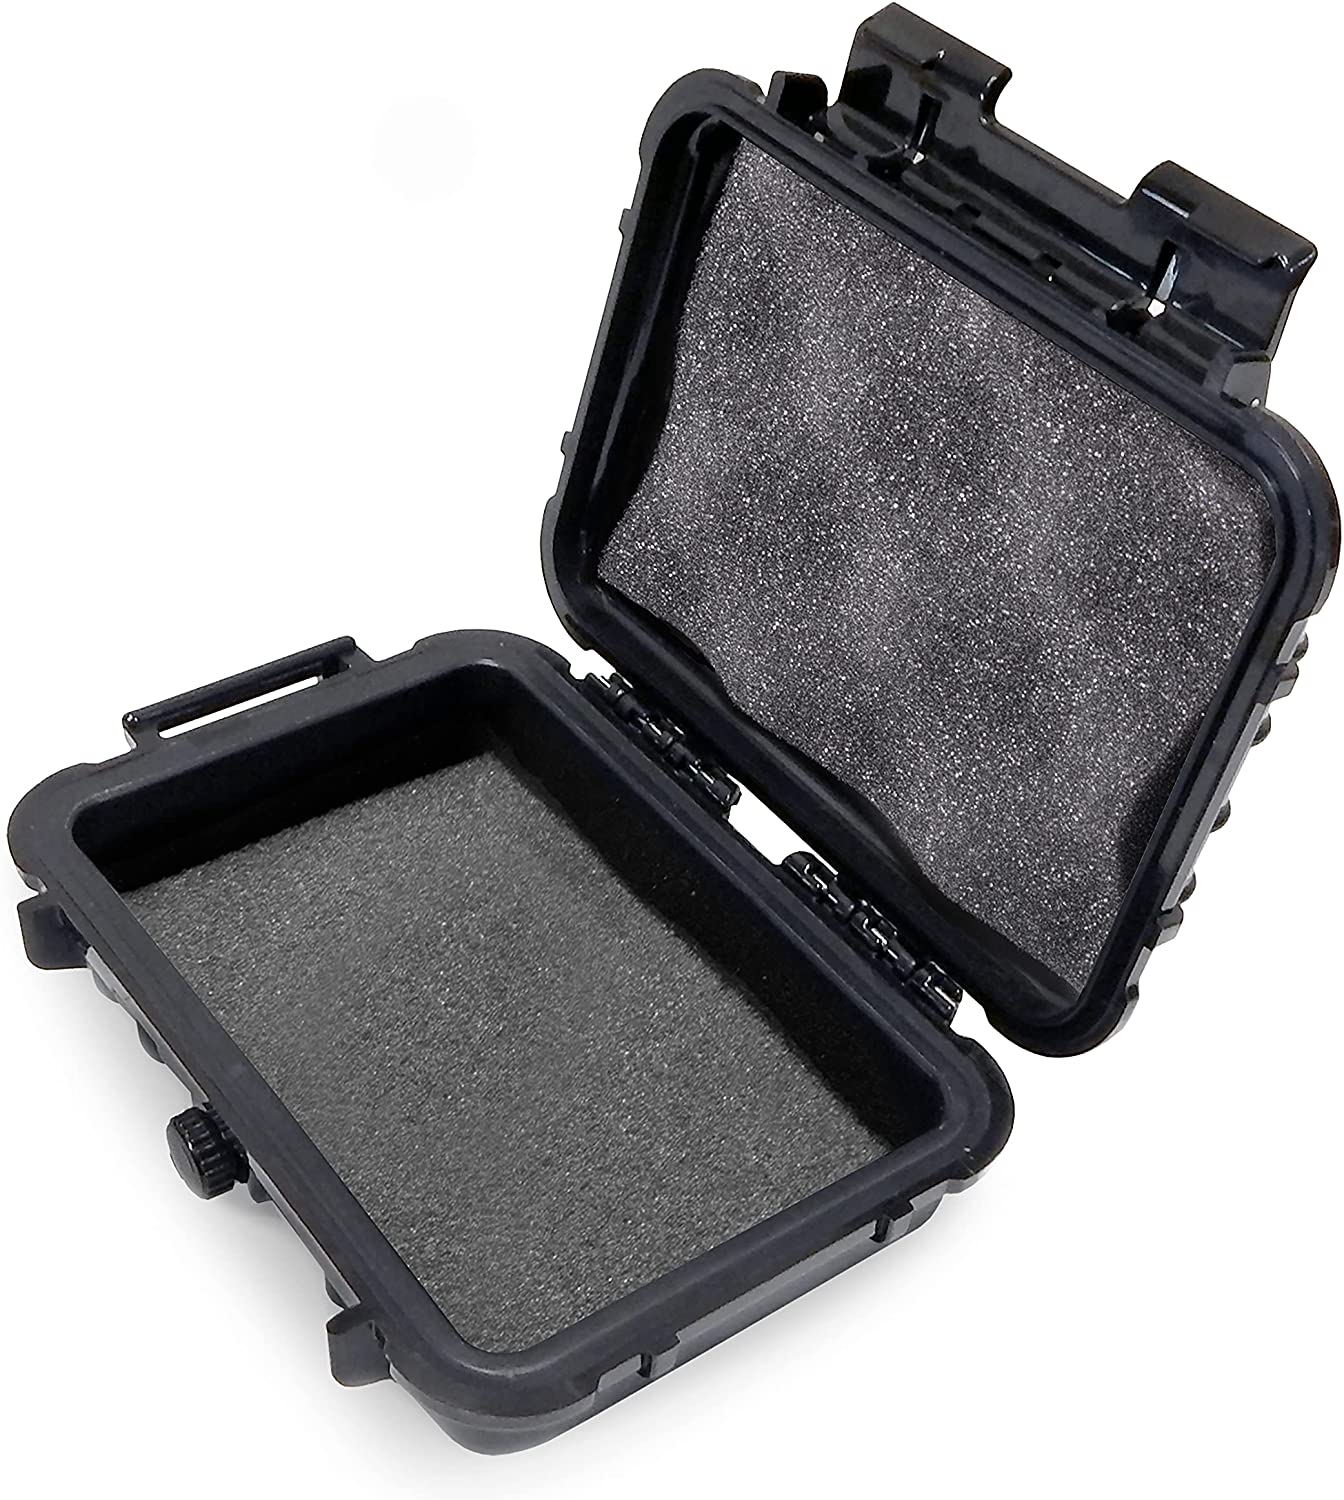 CASEMATIX Graded Coin Case Compatible with 4 PCGS or NGC Coin